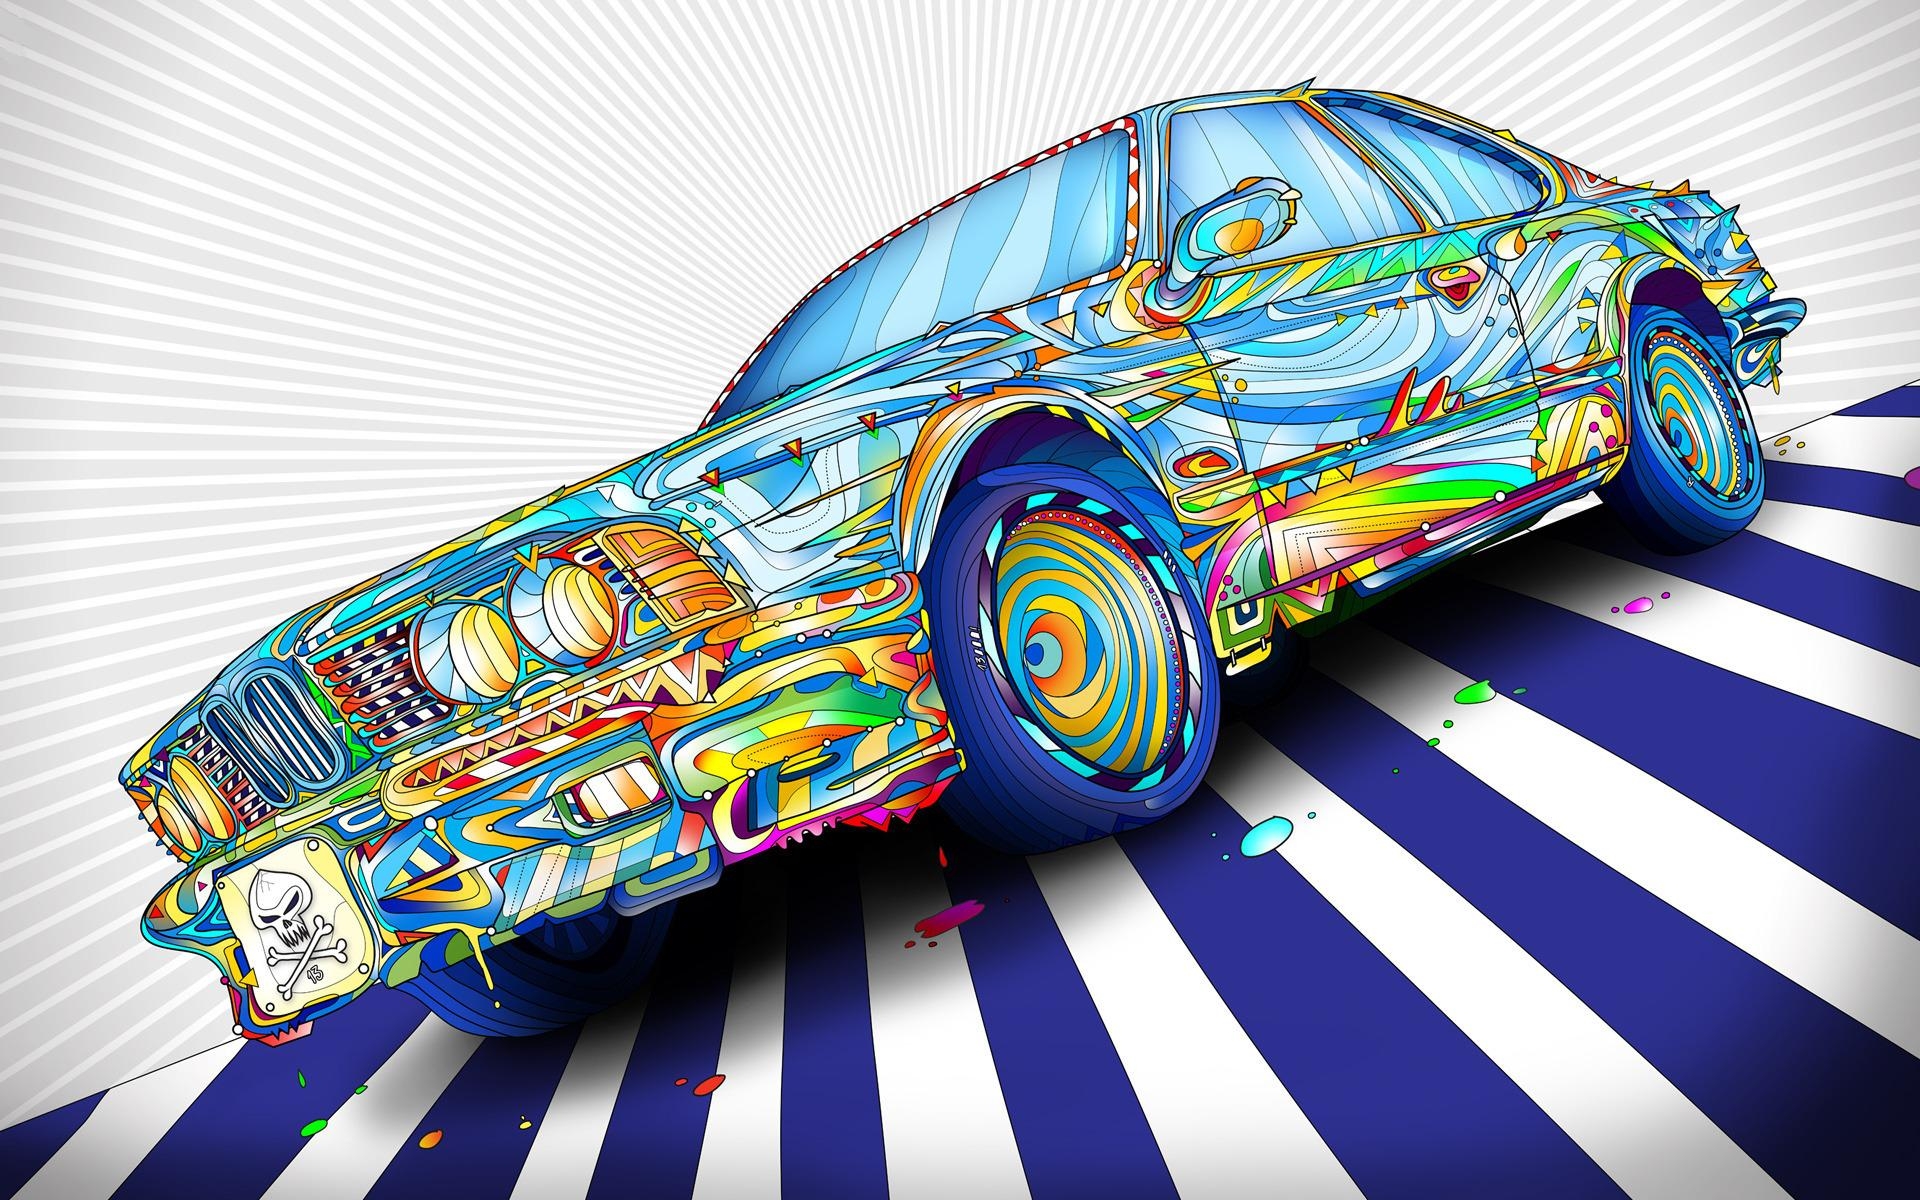 1680x1050 Resolution car, colorful, graphic 1680x1050 Resolution ...